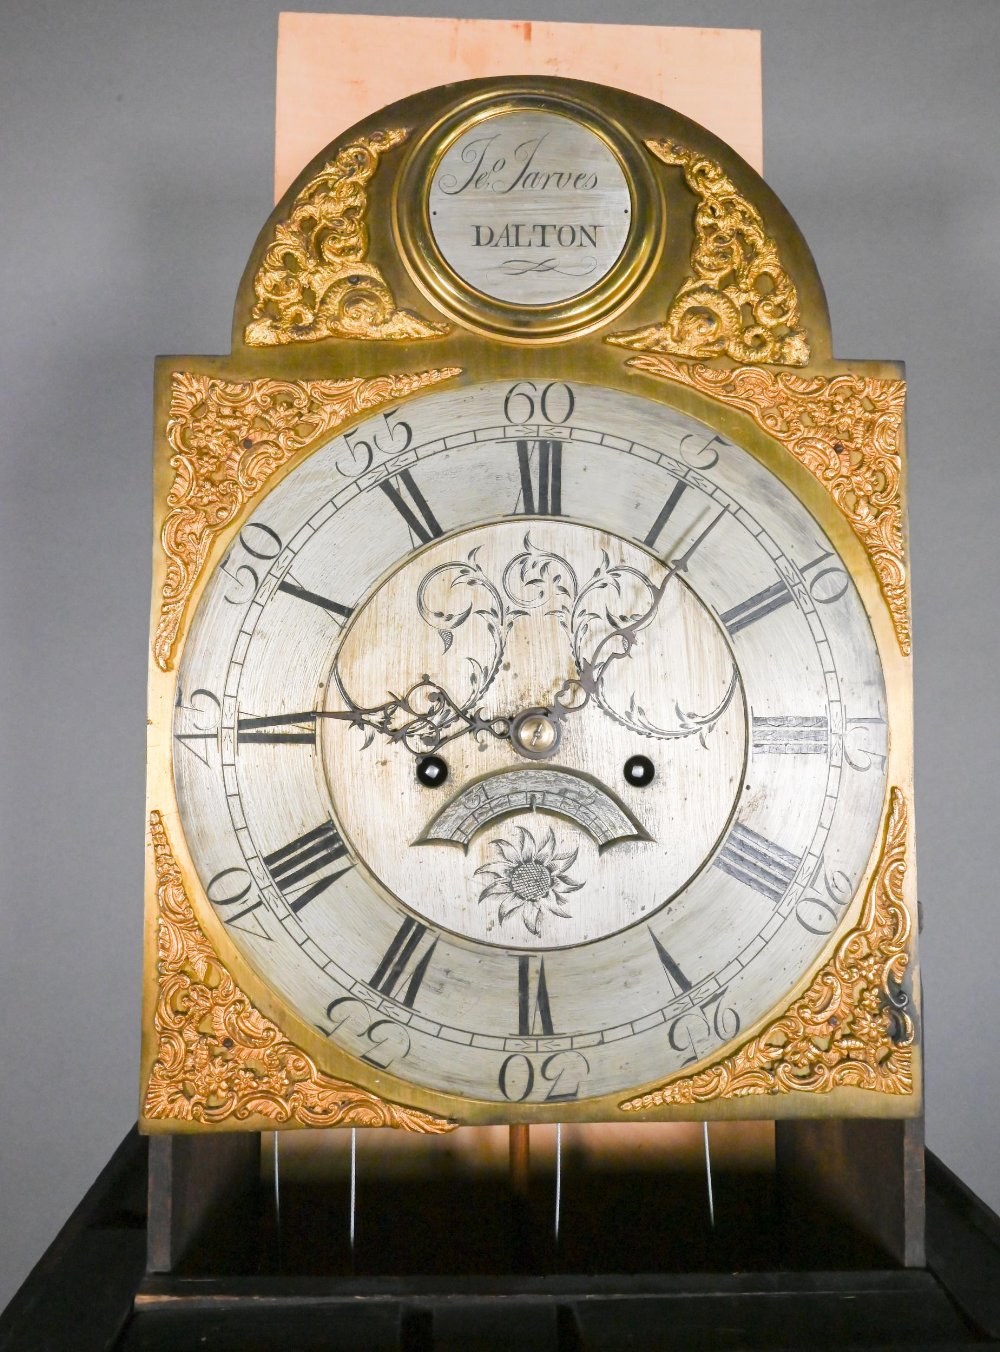 Jarvis, Dalton, an 18th century and later carved oak clock, the eight day movement with arched brass - Image 7 of 8